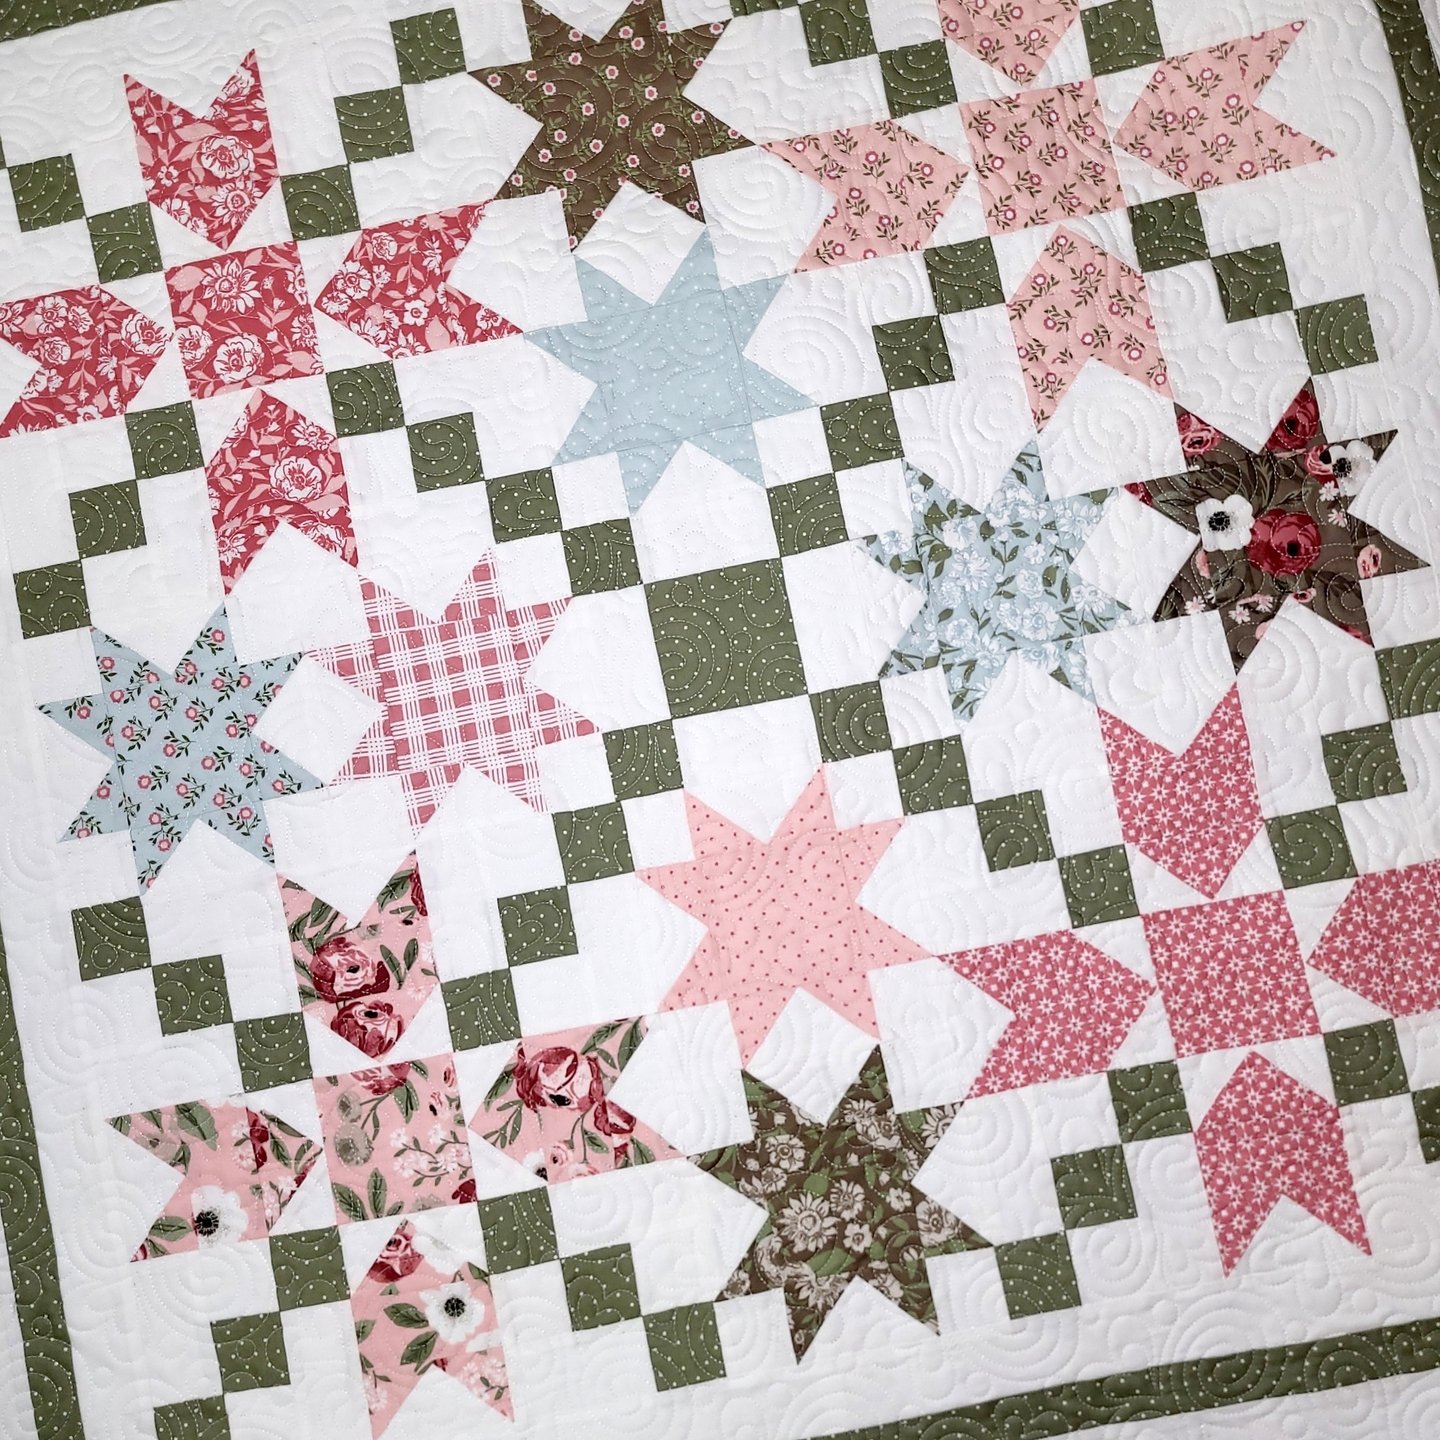 This quilt is so sweet!

Lisa used a @sewsamplerbox to make it and it's adorable!

Maker: Lisa
Quilt: Dulce with fabric from @lellaboutique
Pantograph: Sweet Marmalade

#pieceofhomequilts #pohquilts #glidethread #computerizedquilting #apqsfreddie #ap